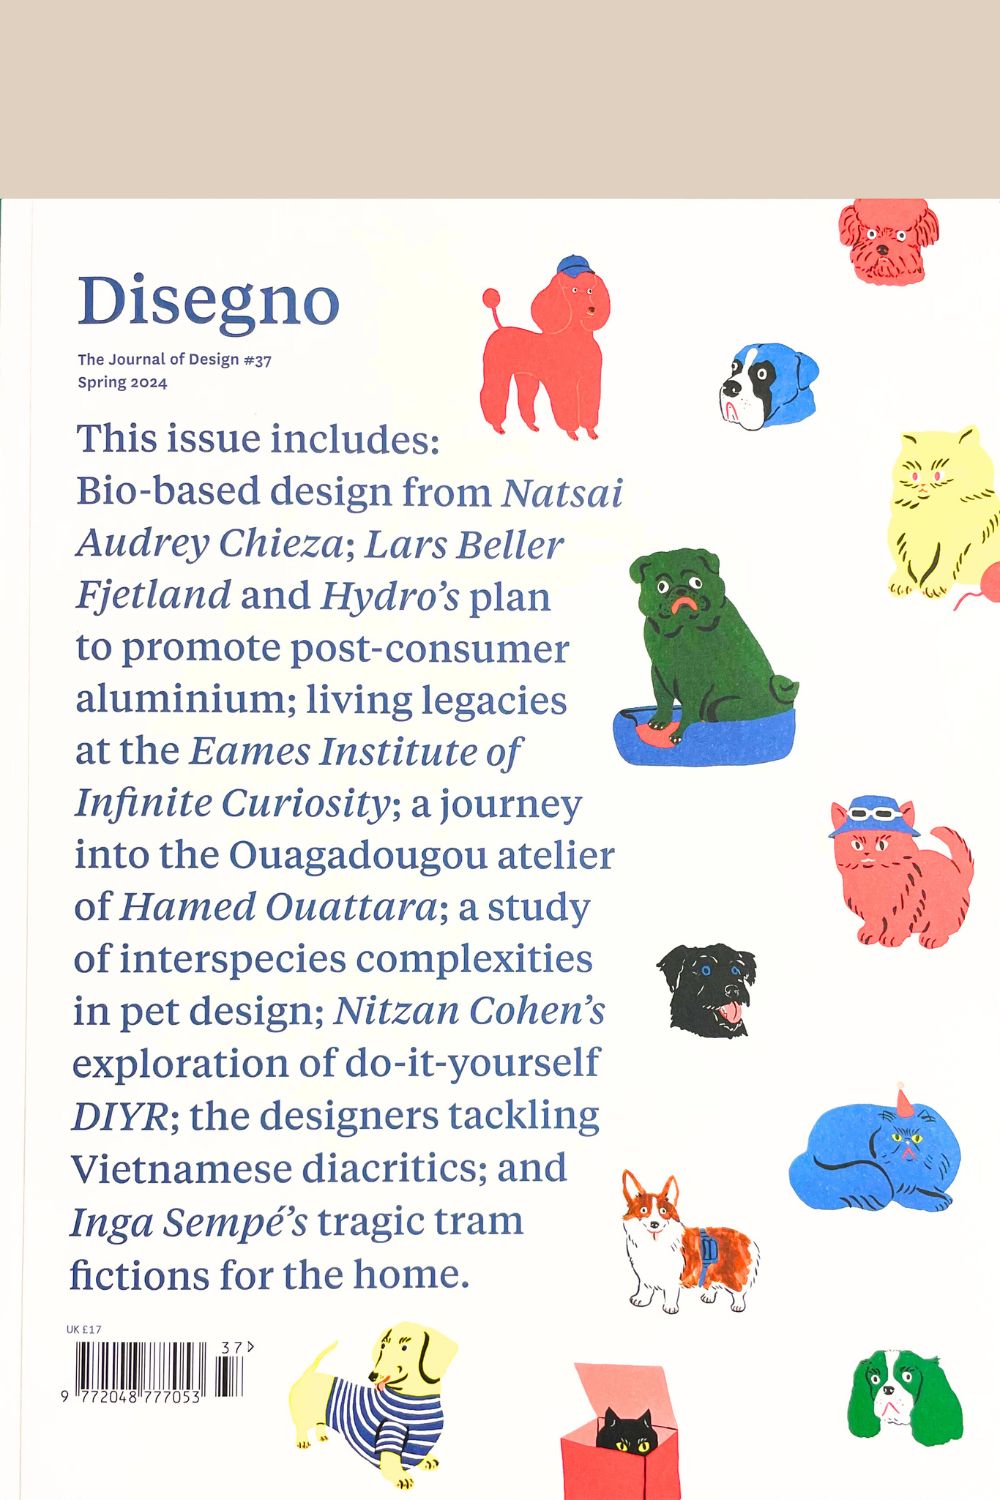 Disegno Issue 37 cover (text on white background with cat and dog illustrations)